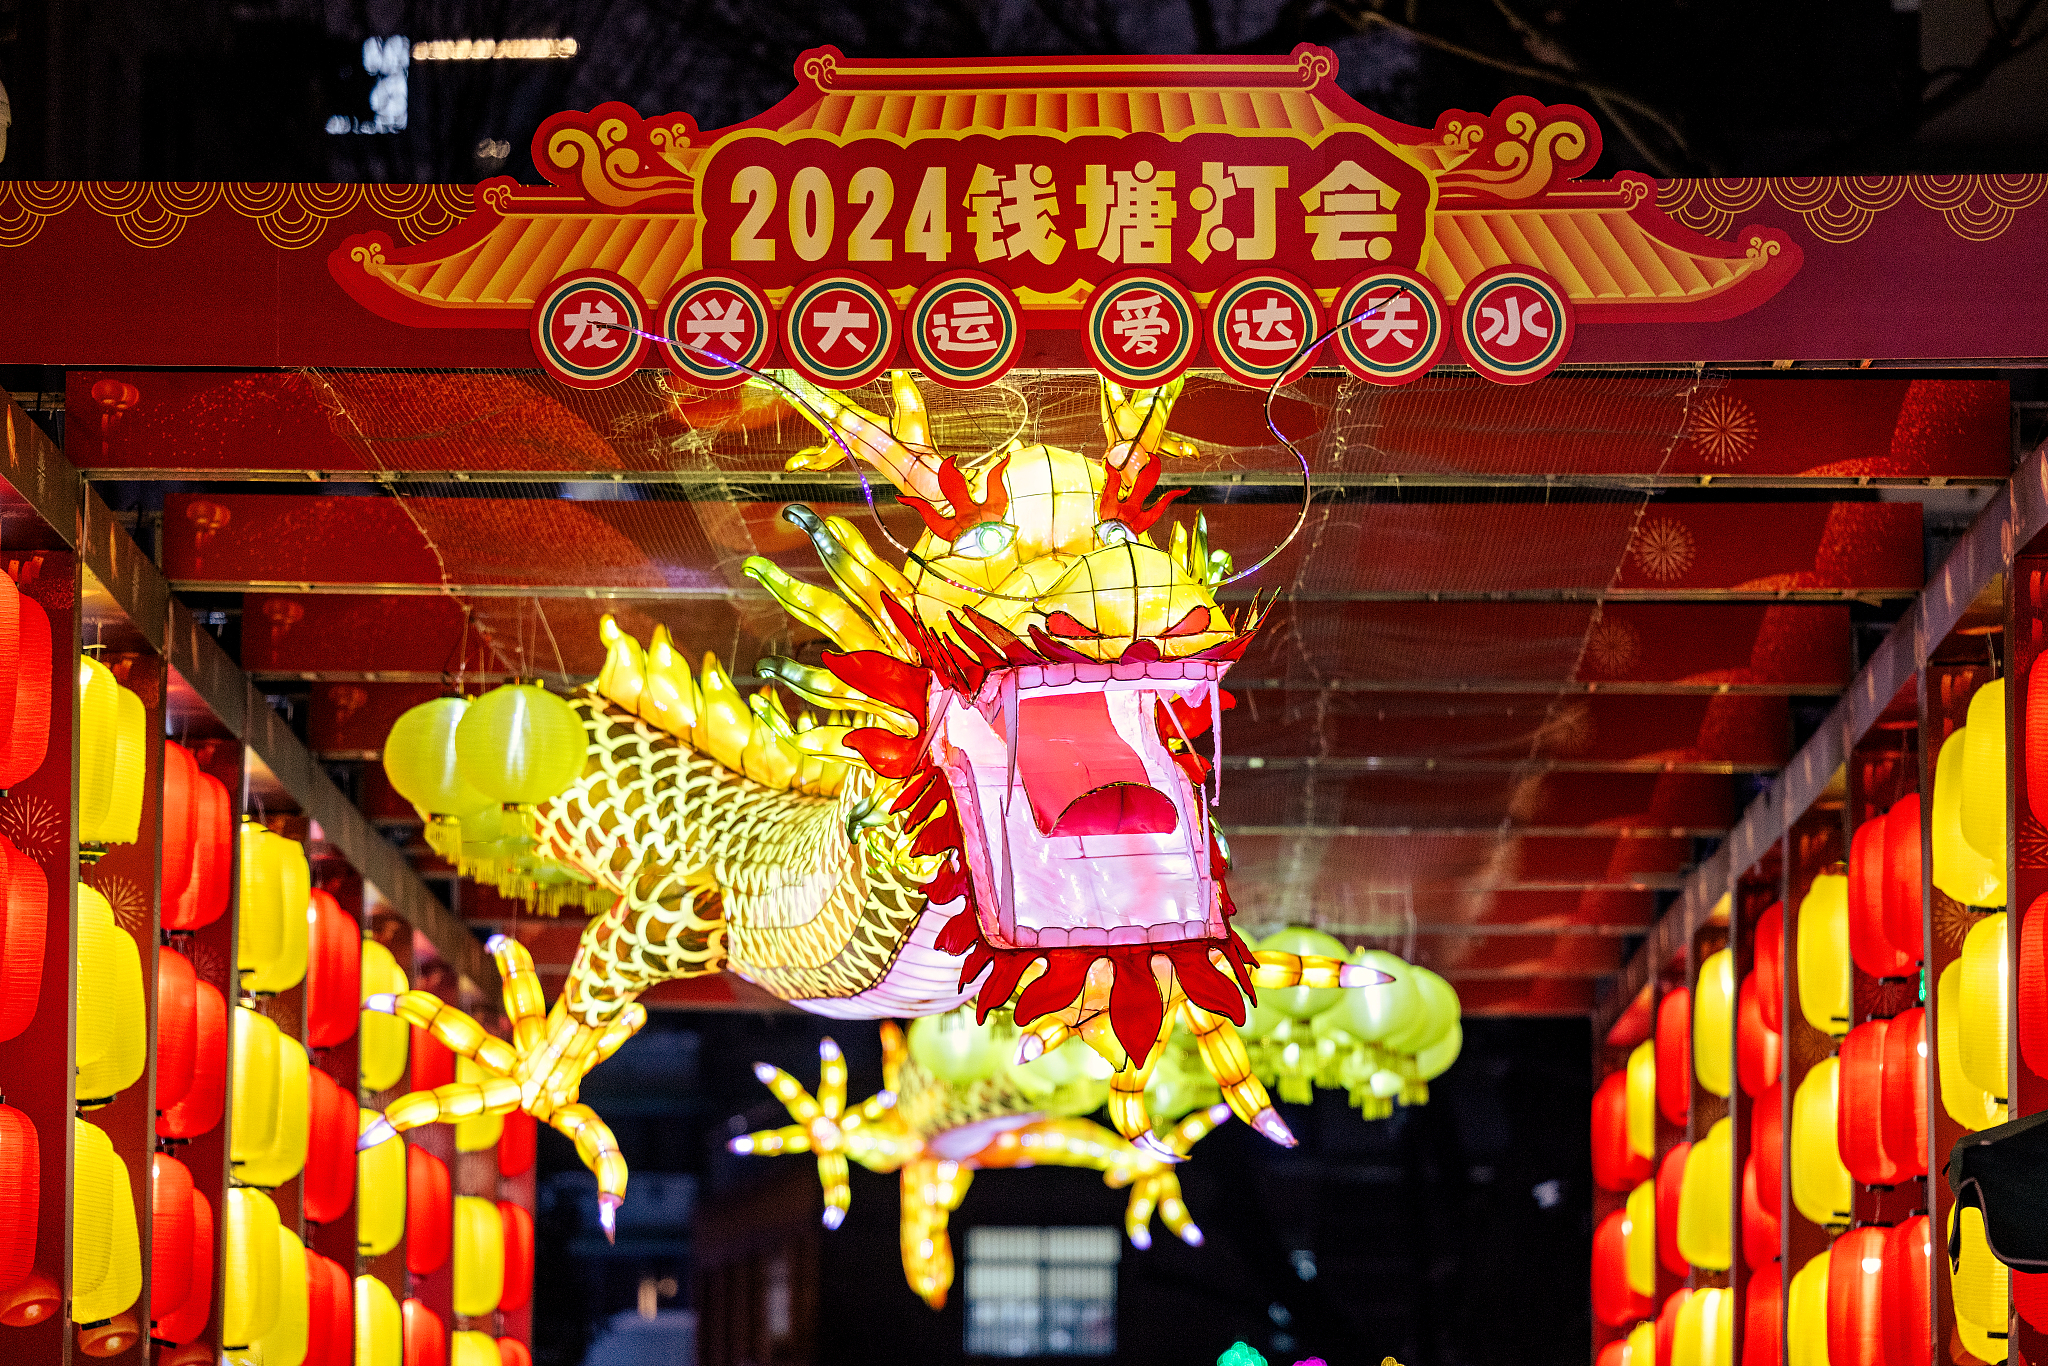 A lantern show in a community, showcasing a dazzling array of colors and designs, Hangzhou, capital of east China's Zhejiang Province, February 23, 2024. /CFP